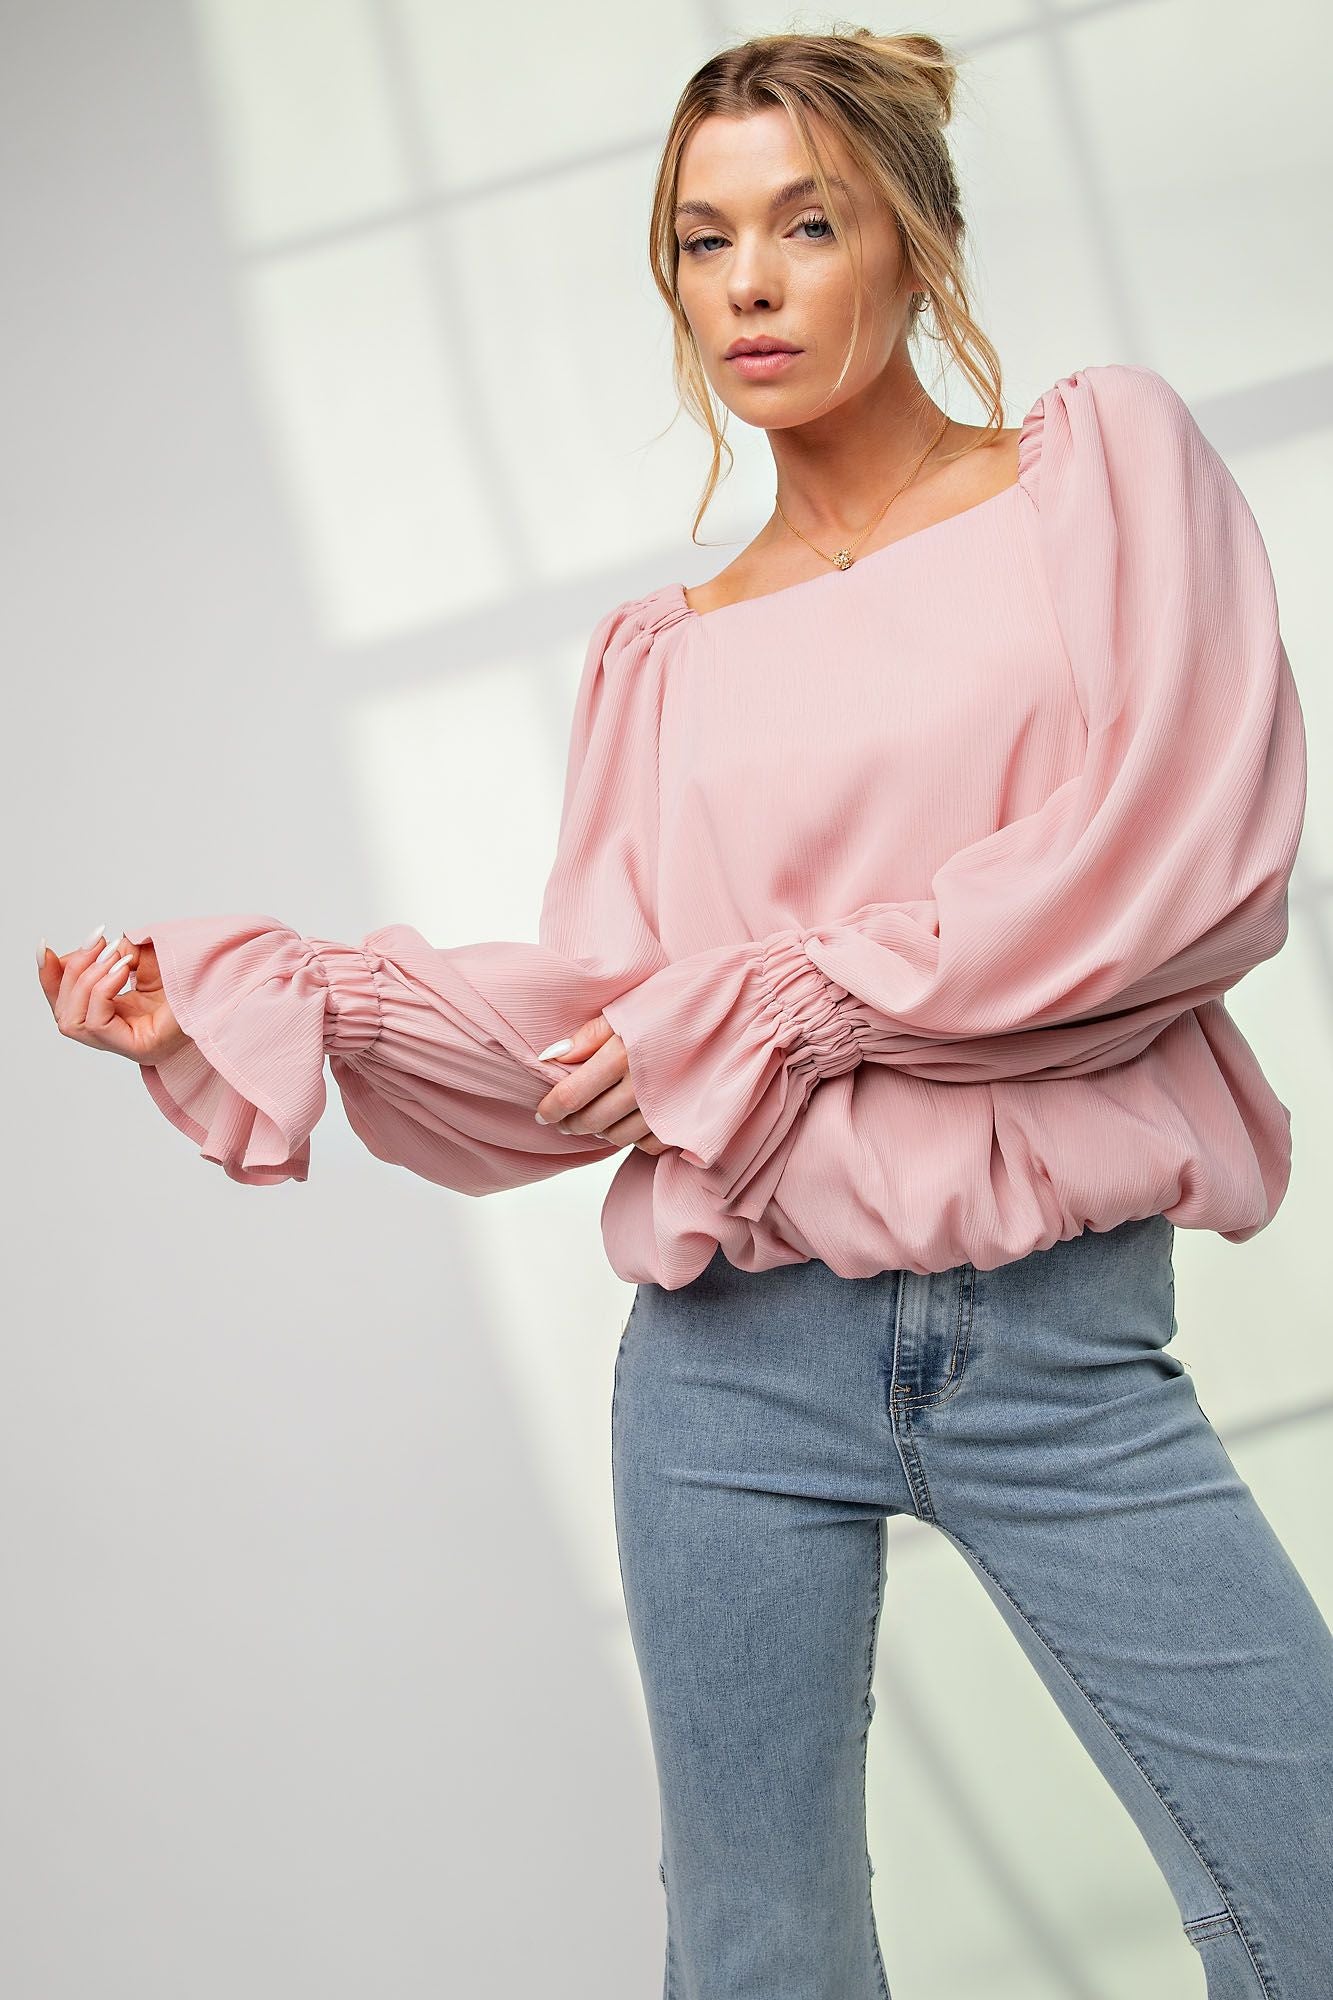 Blush Chiffon Bubble Top - Corinne Boutique Family Owned and Operated USA